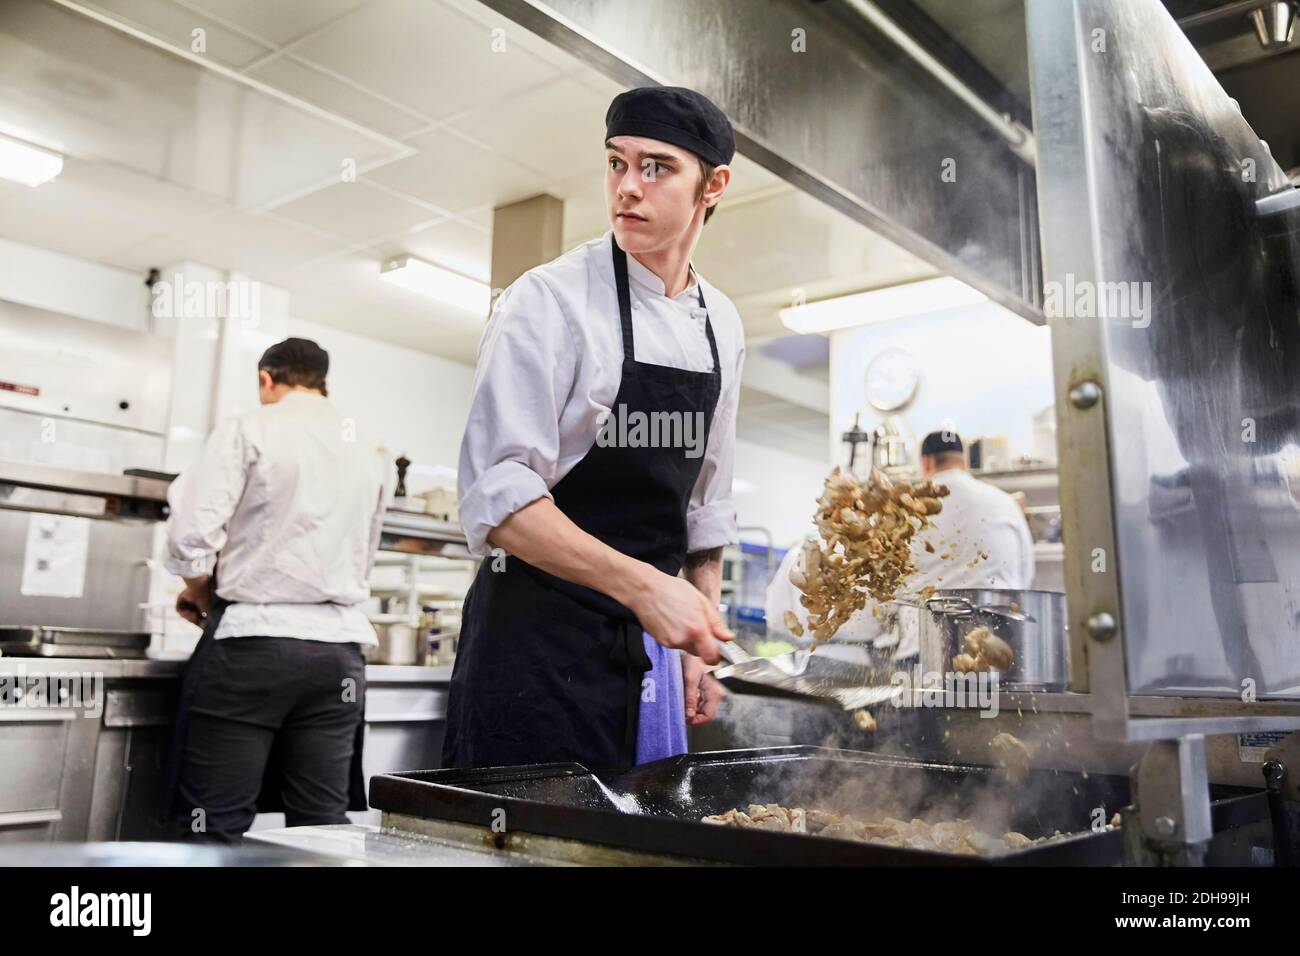 Male chef student tossing meat with colleagues in background at cooking school Stock Photo